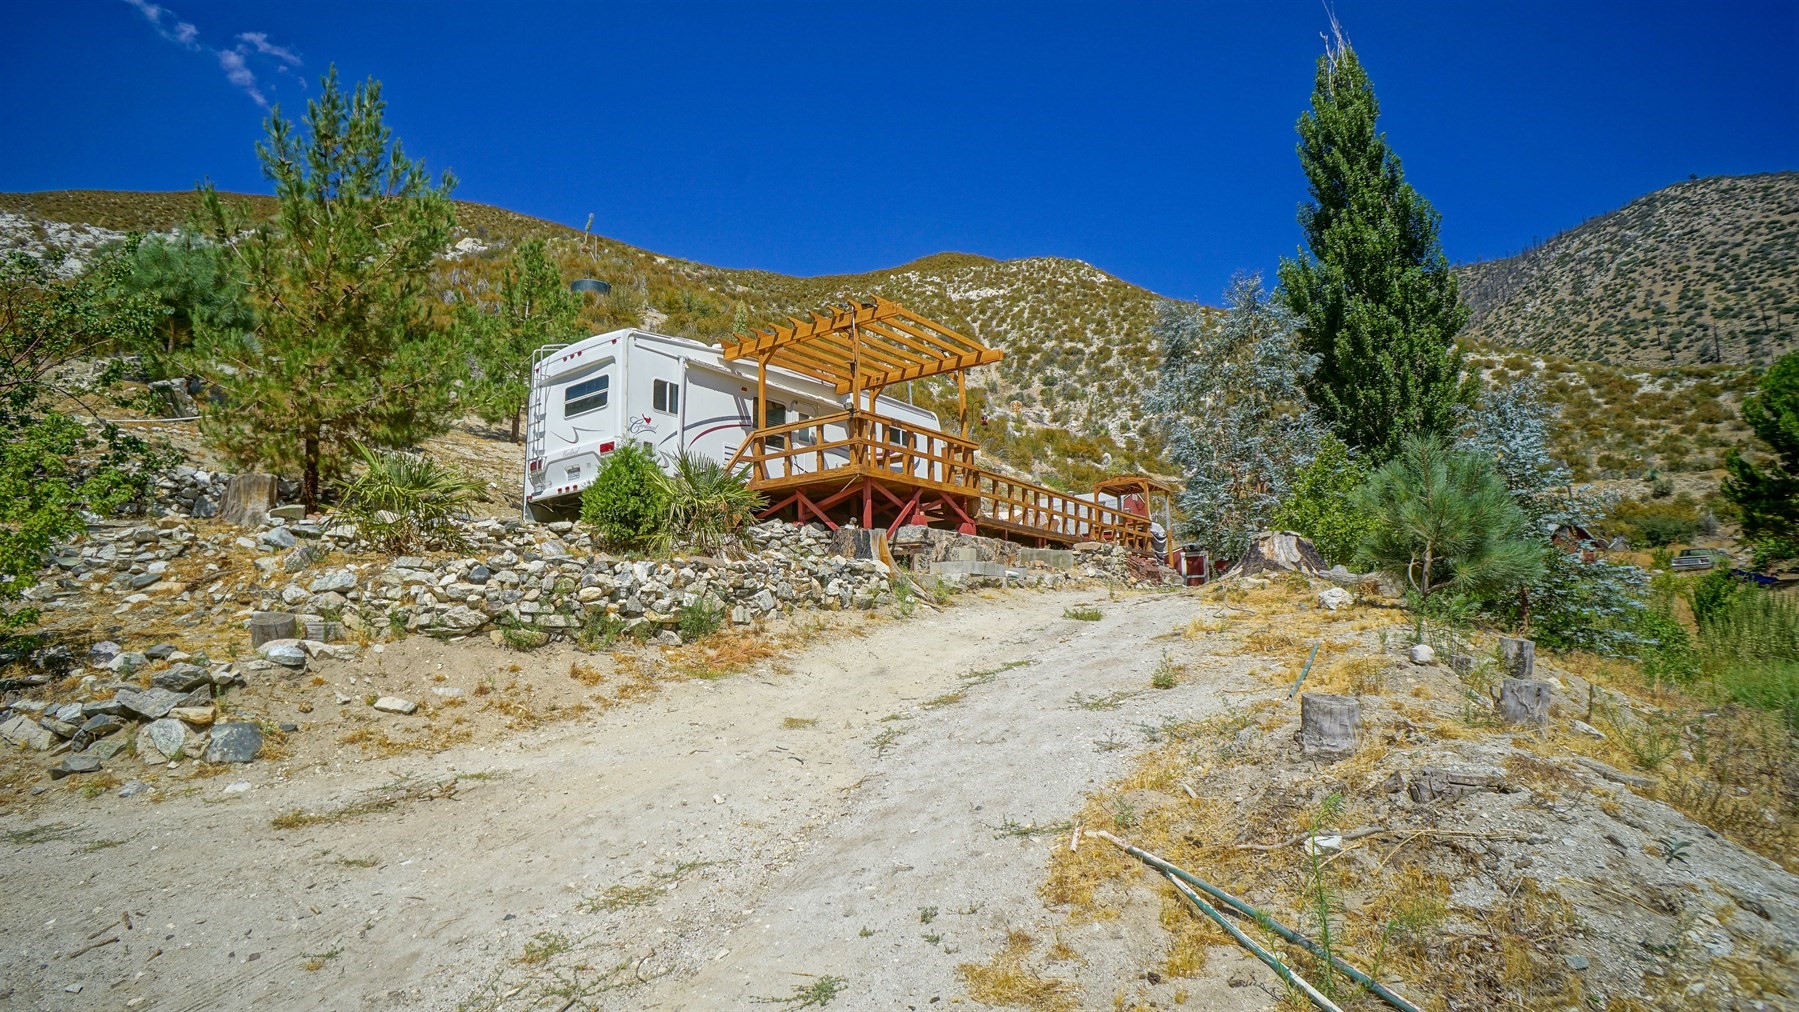 You Can Buy Your Very Own California Gold Mine Camp for $500K